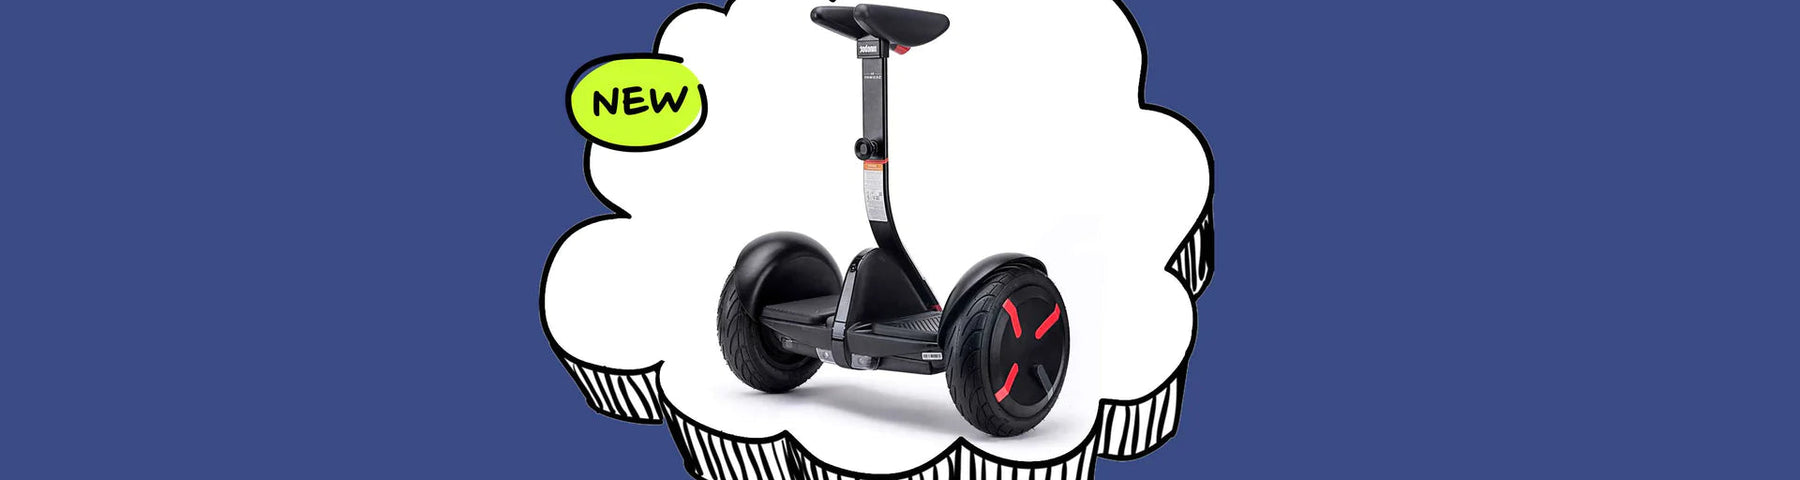 Introducing The Ride On Kids’ Collection Of Scooters